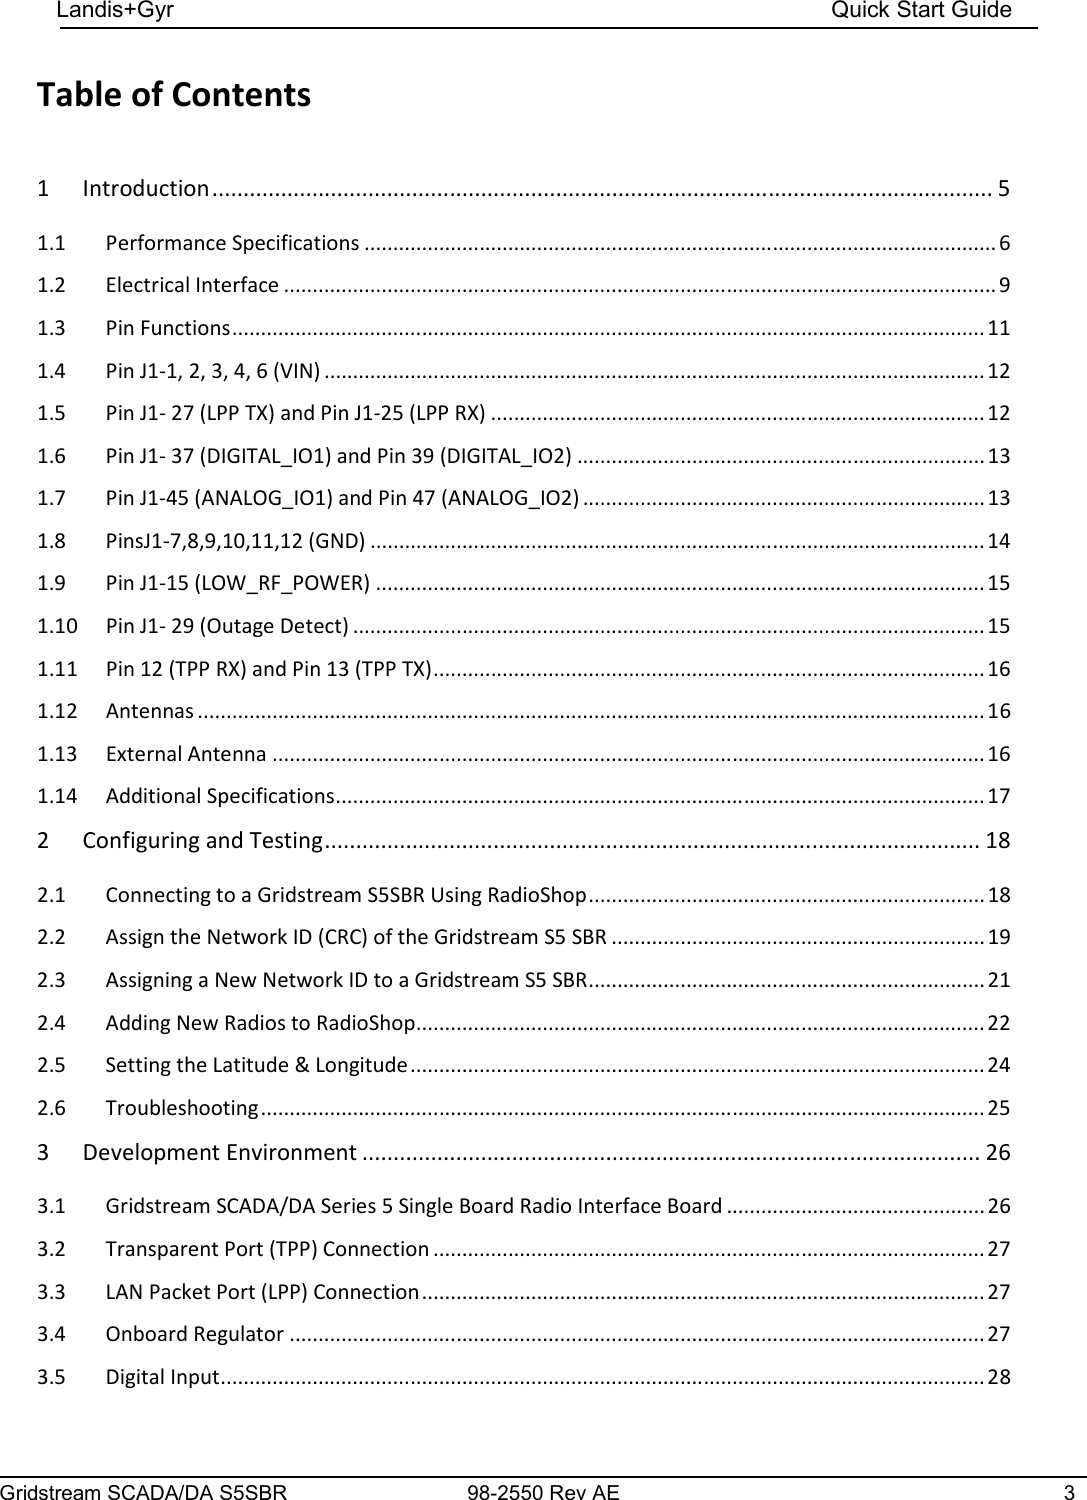 Gridstream SCADA/DA S5SBR 98-2550 Rev AE  3    Landis+Gyr    Quick Start Guide    Table of Contents  1 Introduction ............................................................................................................................. 5 1.1  Performance Specifications .............................................................................................................. 6 1.2  Electrical Interface ............................................................................................................................ 9 1.3  Pin Functions ................................................................................................................................... 11 1.4  Pin J1-1, 2, 3, 4, 6 (VIN) ................................................................................................................... 12 1.5  Pin J1- 27 (LPP TX) and Pin J1-25 (LPP RX) ...................................................................................... 12 1.6  Pin J1- 37 (DIGITAL_IO1) and Pin 39 (DIGITAL_IO2) ....................................................................... 13 1.7  Pin J1-45 (ANALOG_IO1) and Pin 47 (ANALOG_IO2) ...................................................................... 13 1.8  PinsJ1-7,8,9,10,11,12 (GND) ........................................................................................................... 14 1.9  Pin J1-15 (LOW_RF_POWER) .......................................................................................................... 15 1.10  Pin J1- 29 (Outage Detect) .............................................................................................................. 15 1.11  Pin 12 (TPP RX) and Pin 13 (TPP TX) ................................................................................................ 16 1.12  Antennas ......................................................................................................................................... 16 1.13  External Antenna ............................................................................................................................ 16 1.14  Additional Specifications ................................................................................................................. 17 2 Configuring and Testing ......................................................................................................... 18 2.1  Connecting to a Gridstream S5SBR Using RadioShop ..................................................................... 18 2.2  Assign the Network ID (CRC) of the Gridstream S5 SBR ................................................................. 19 2.3  Assigning a New Network ID to a Gridstream S5 SBR ..................................................................... 21 2.4  Adding New Radios to RadioShop ................................................................................................... 22 2.5  Setting the Latitude &amp; Longitude .................................................................................................... 24 2.6  Troubleshooting .............................................................................................................................. 25 3 Development Environment ................................................................................................... 26 3.1  Gridstream SCADA/DA Series 5 Single Board Radio Interface Board ............................................. 26 3.2  Transparent Port (TPP) Connection ................................................................................................ 27 3.3  LAN Packet Port (LPP) Connection .................................................................................................. 27 3.4  Onboard Regulator ......................................................................................................................... 27 3.5  Digital Input ..................................................................................................................................... 28 